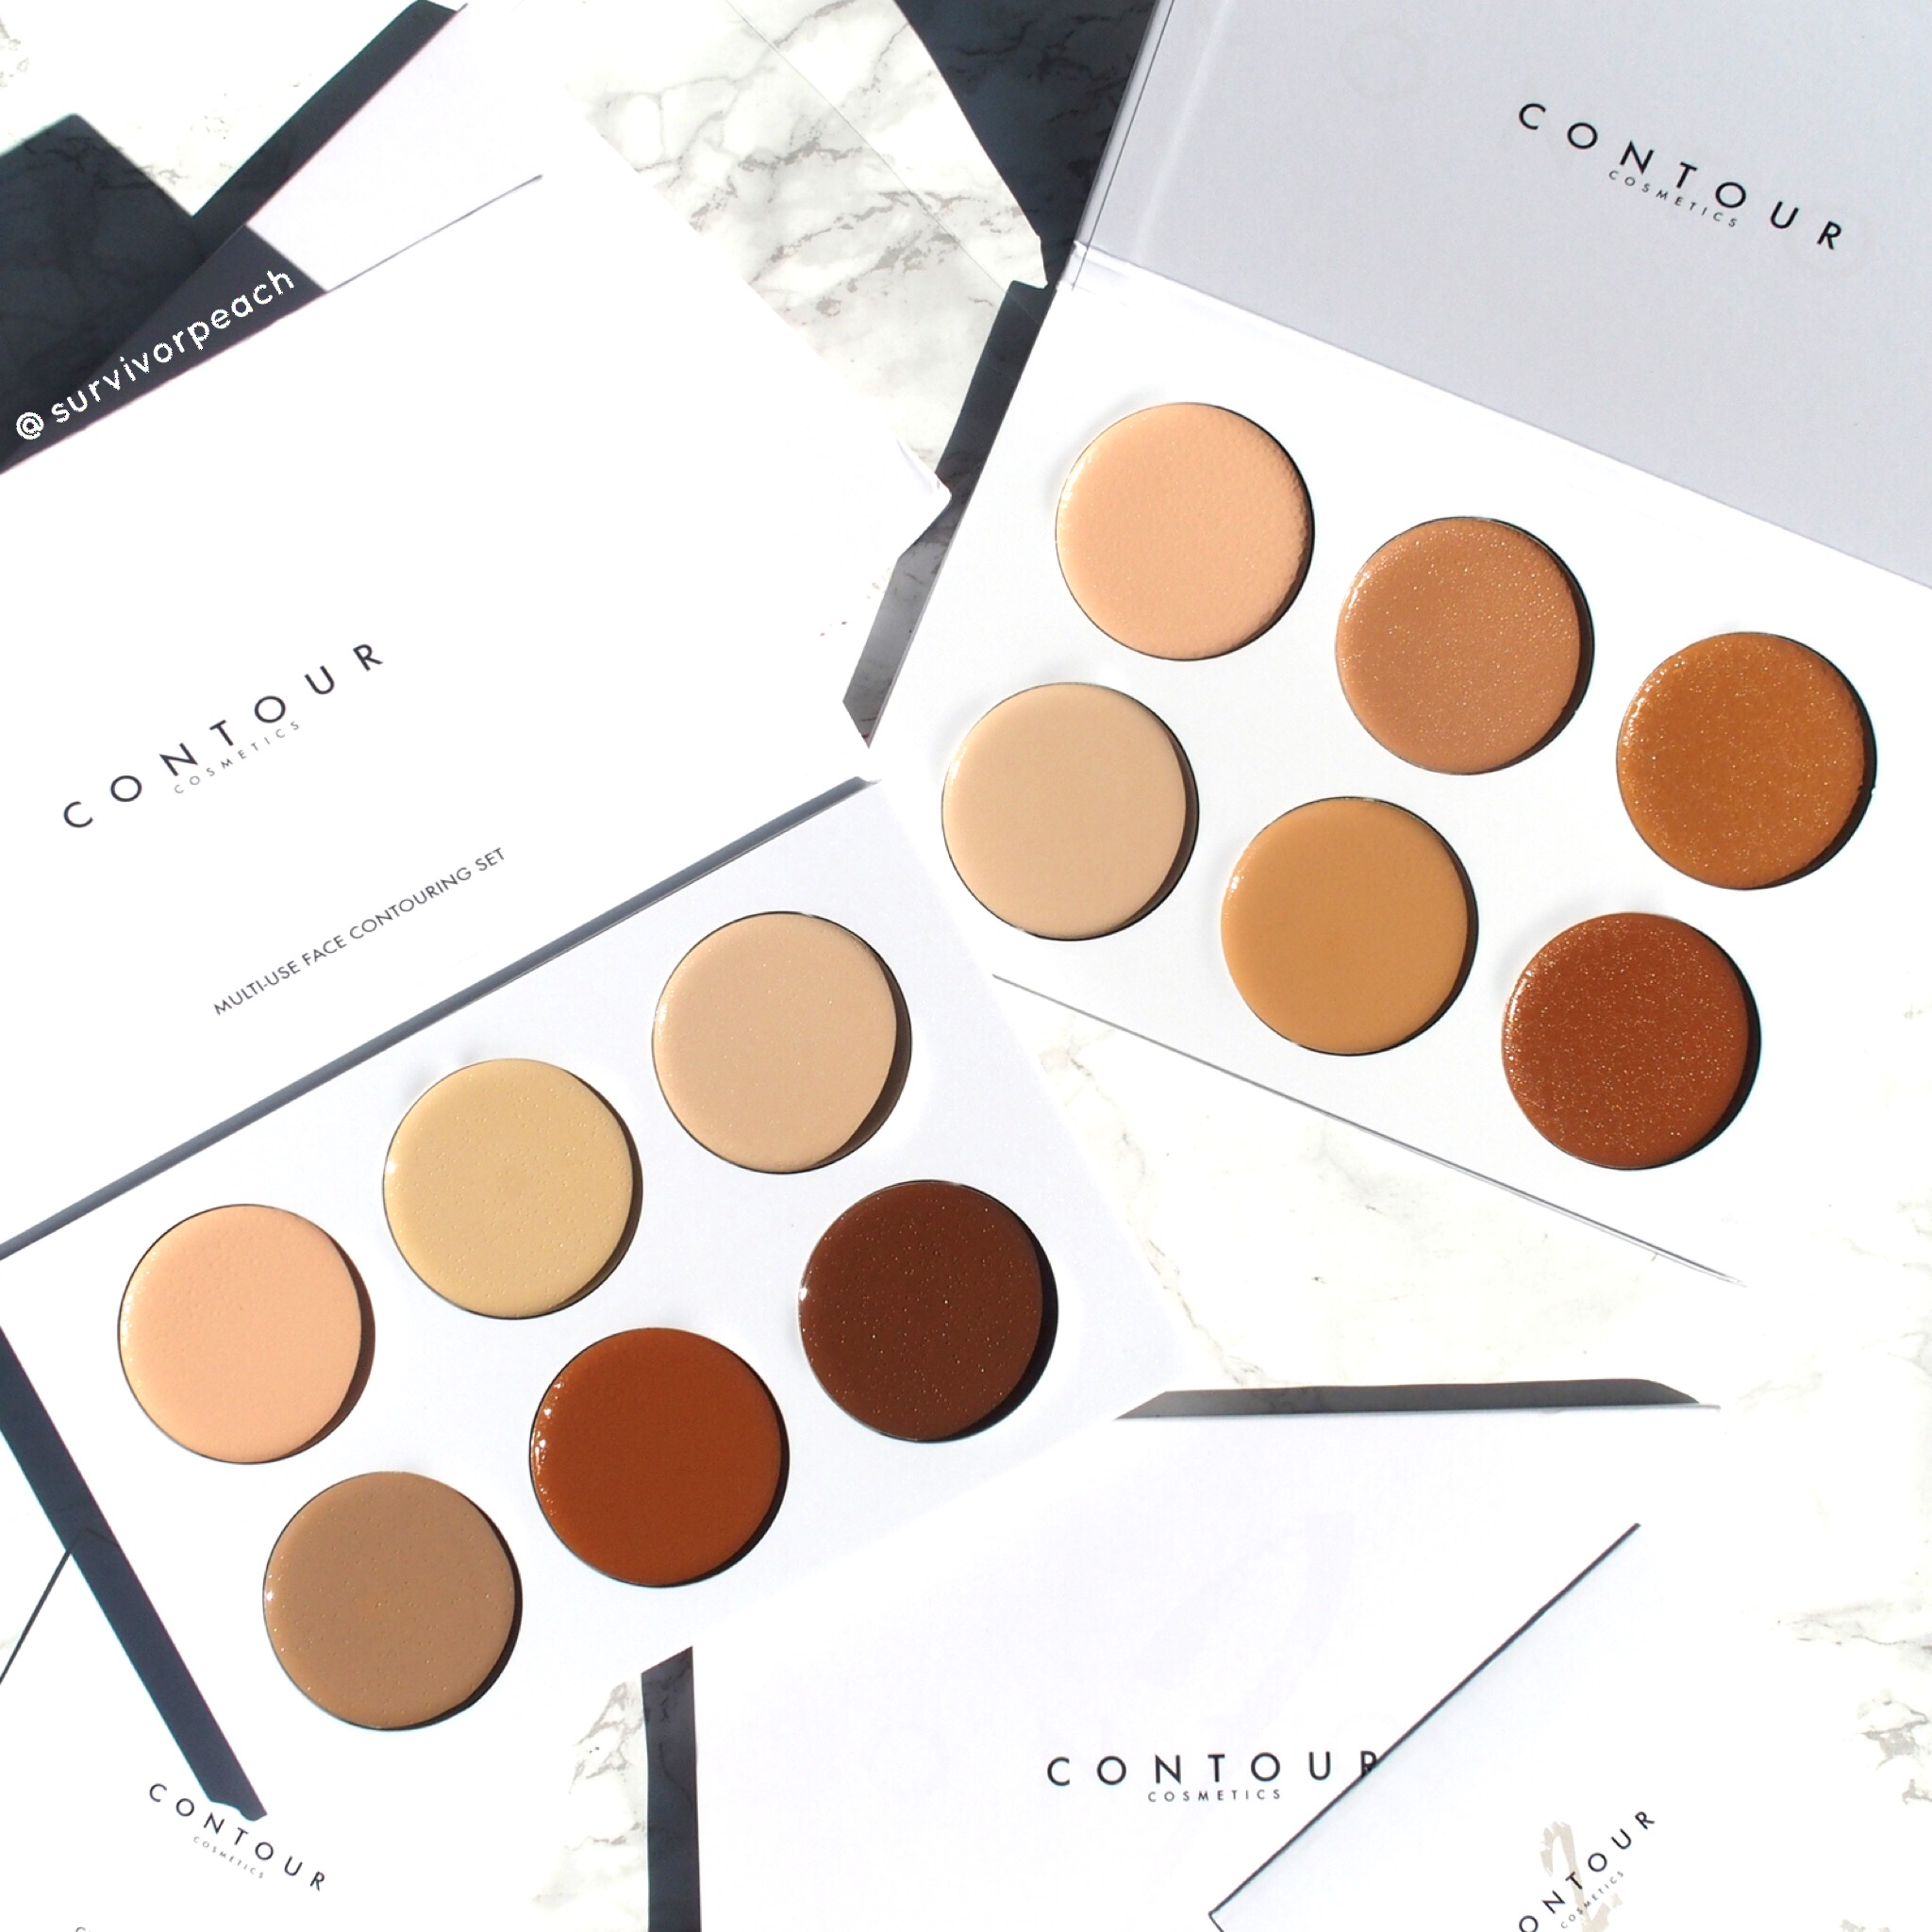 Contour cosmetics collection reviews and swatches — Survivorpeach